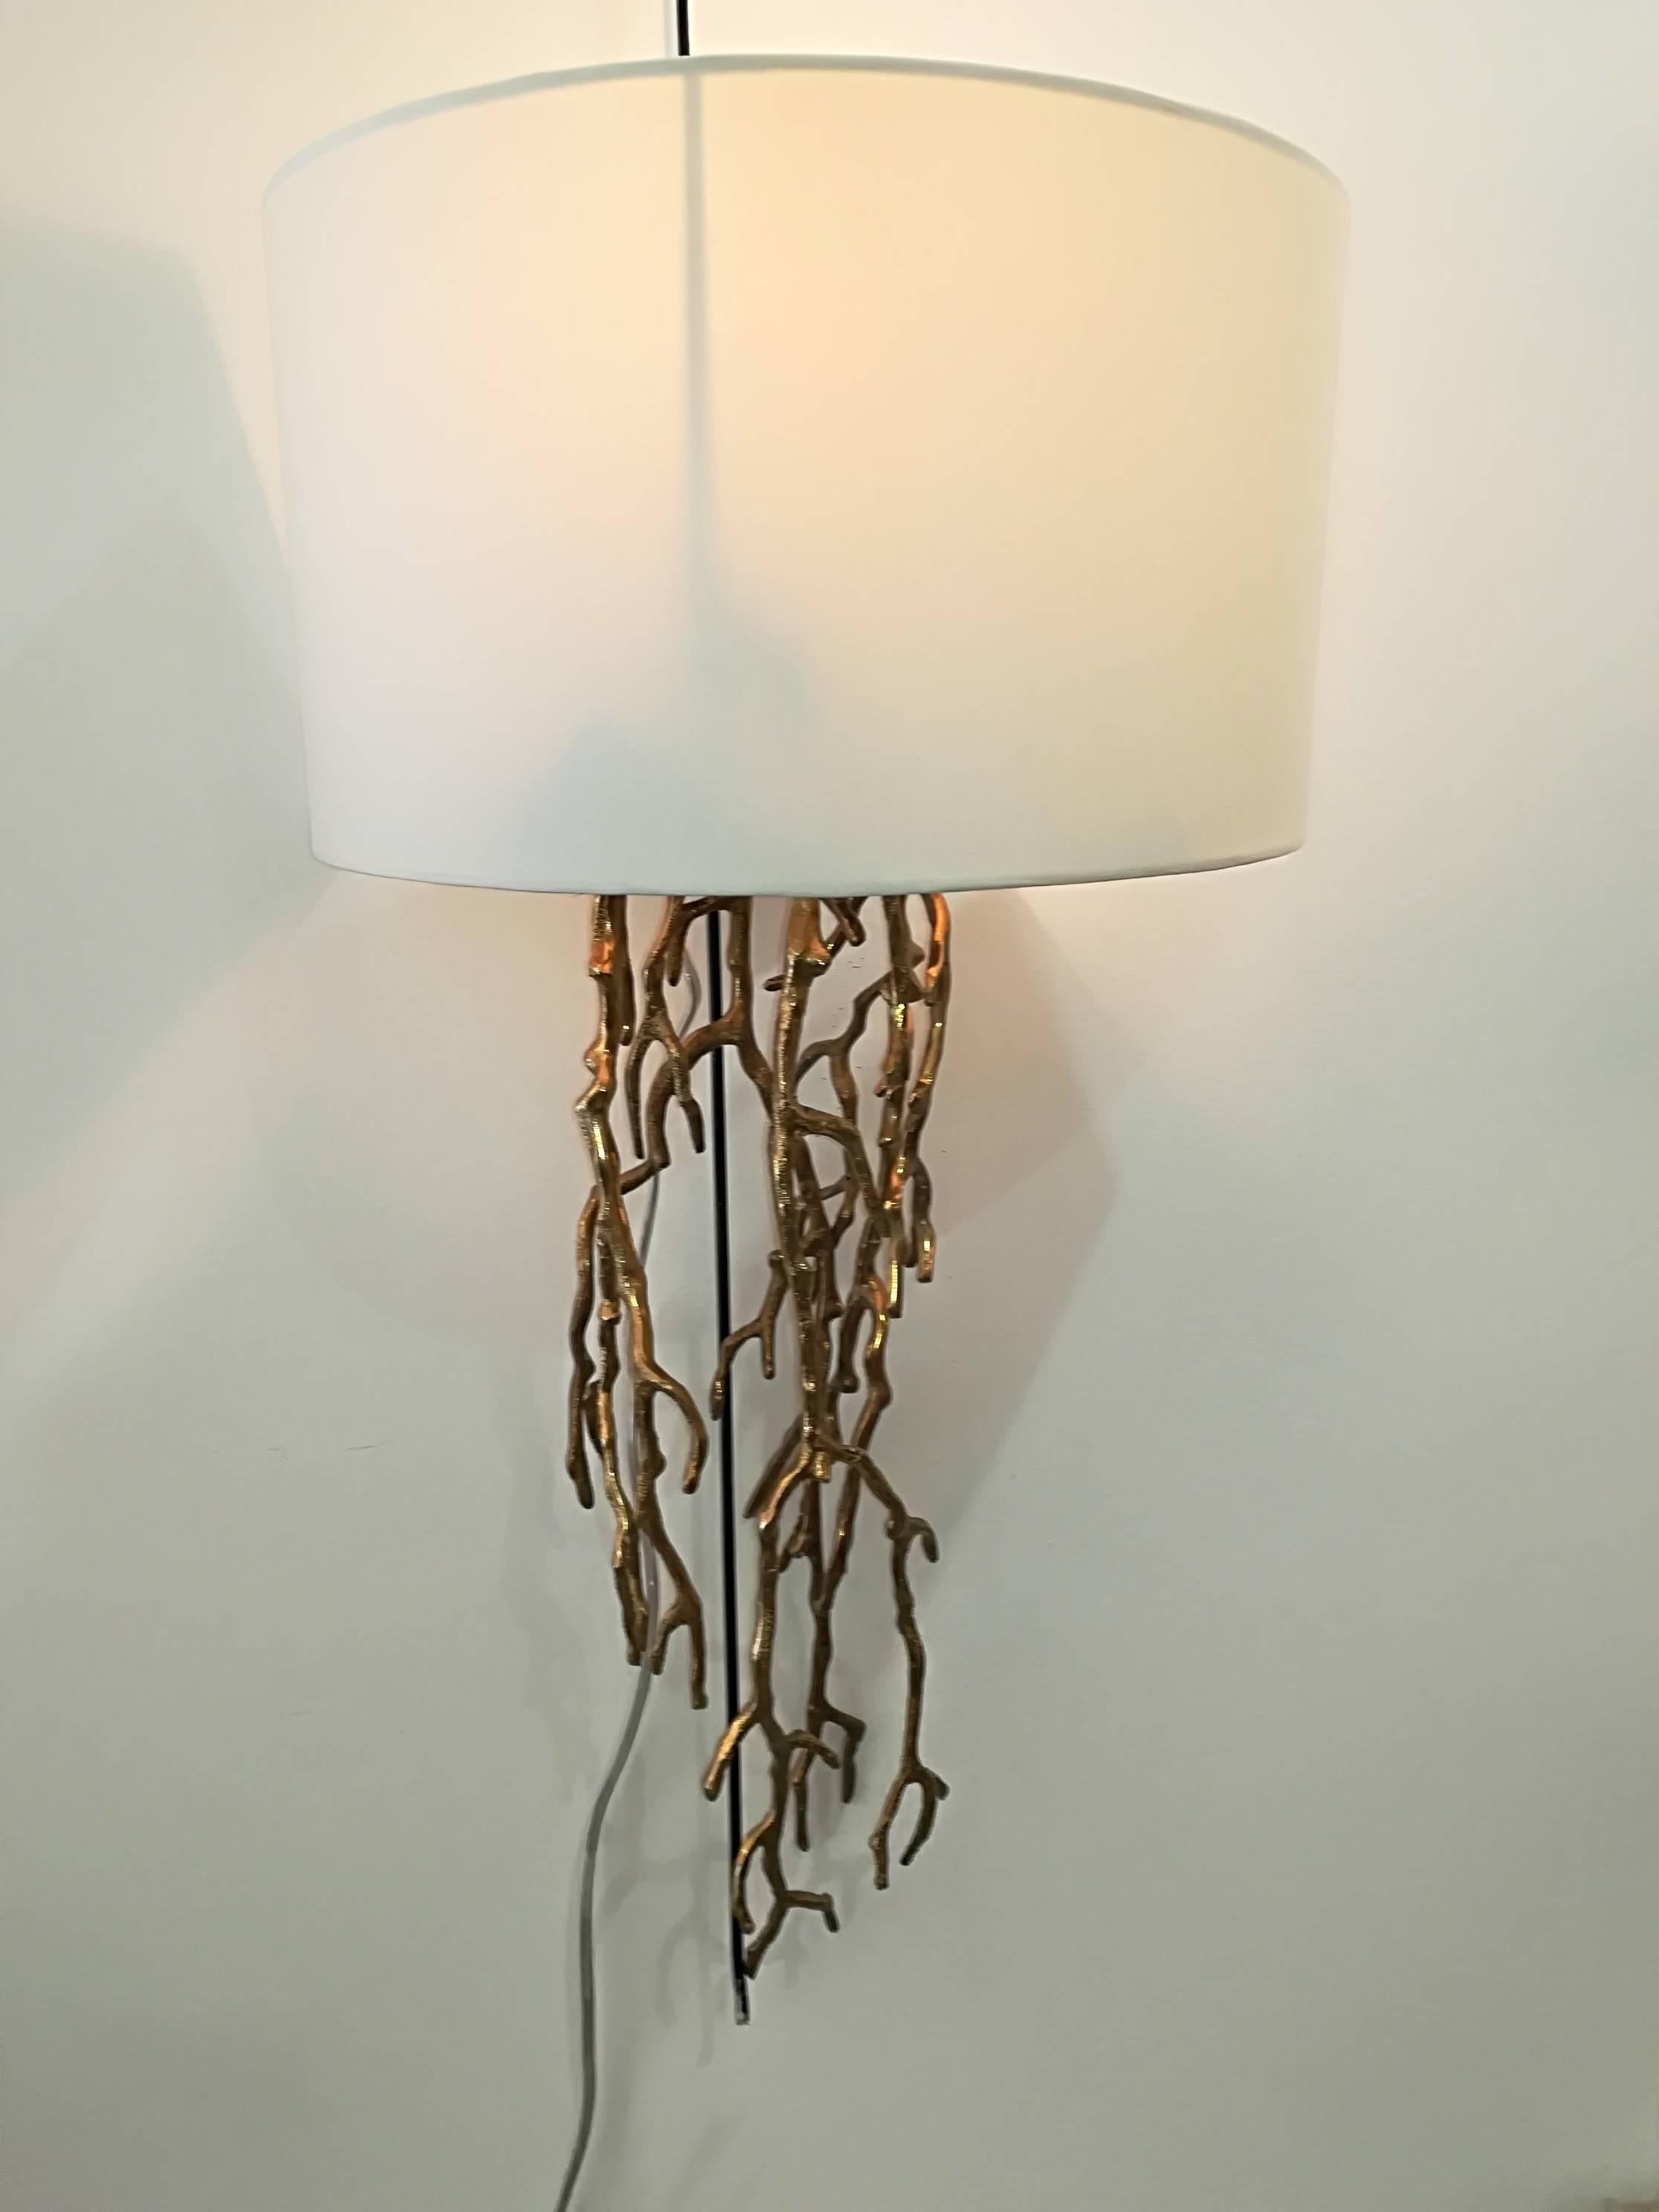 Pair of sconces, provided with elegant white lampshades.